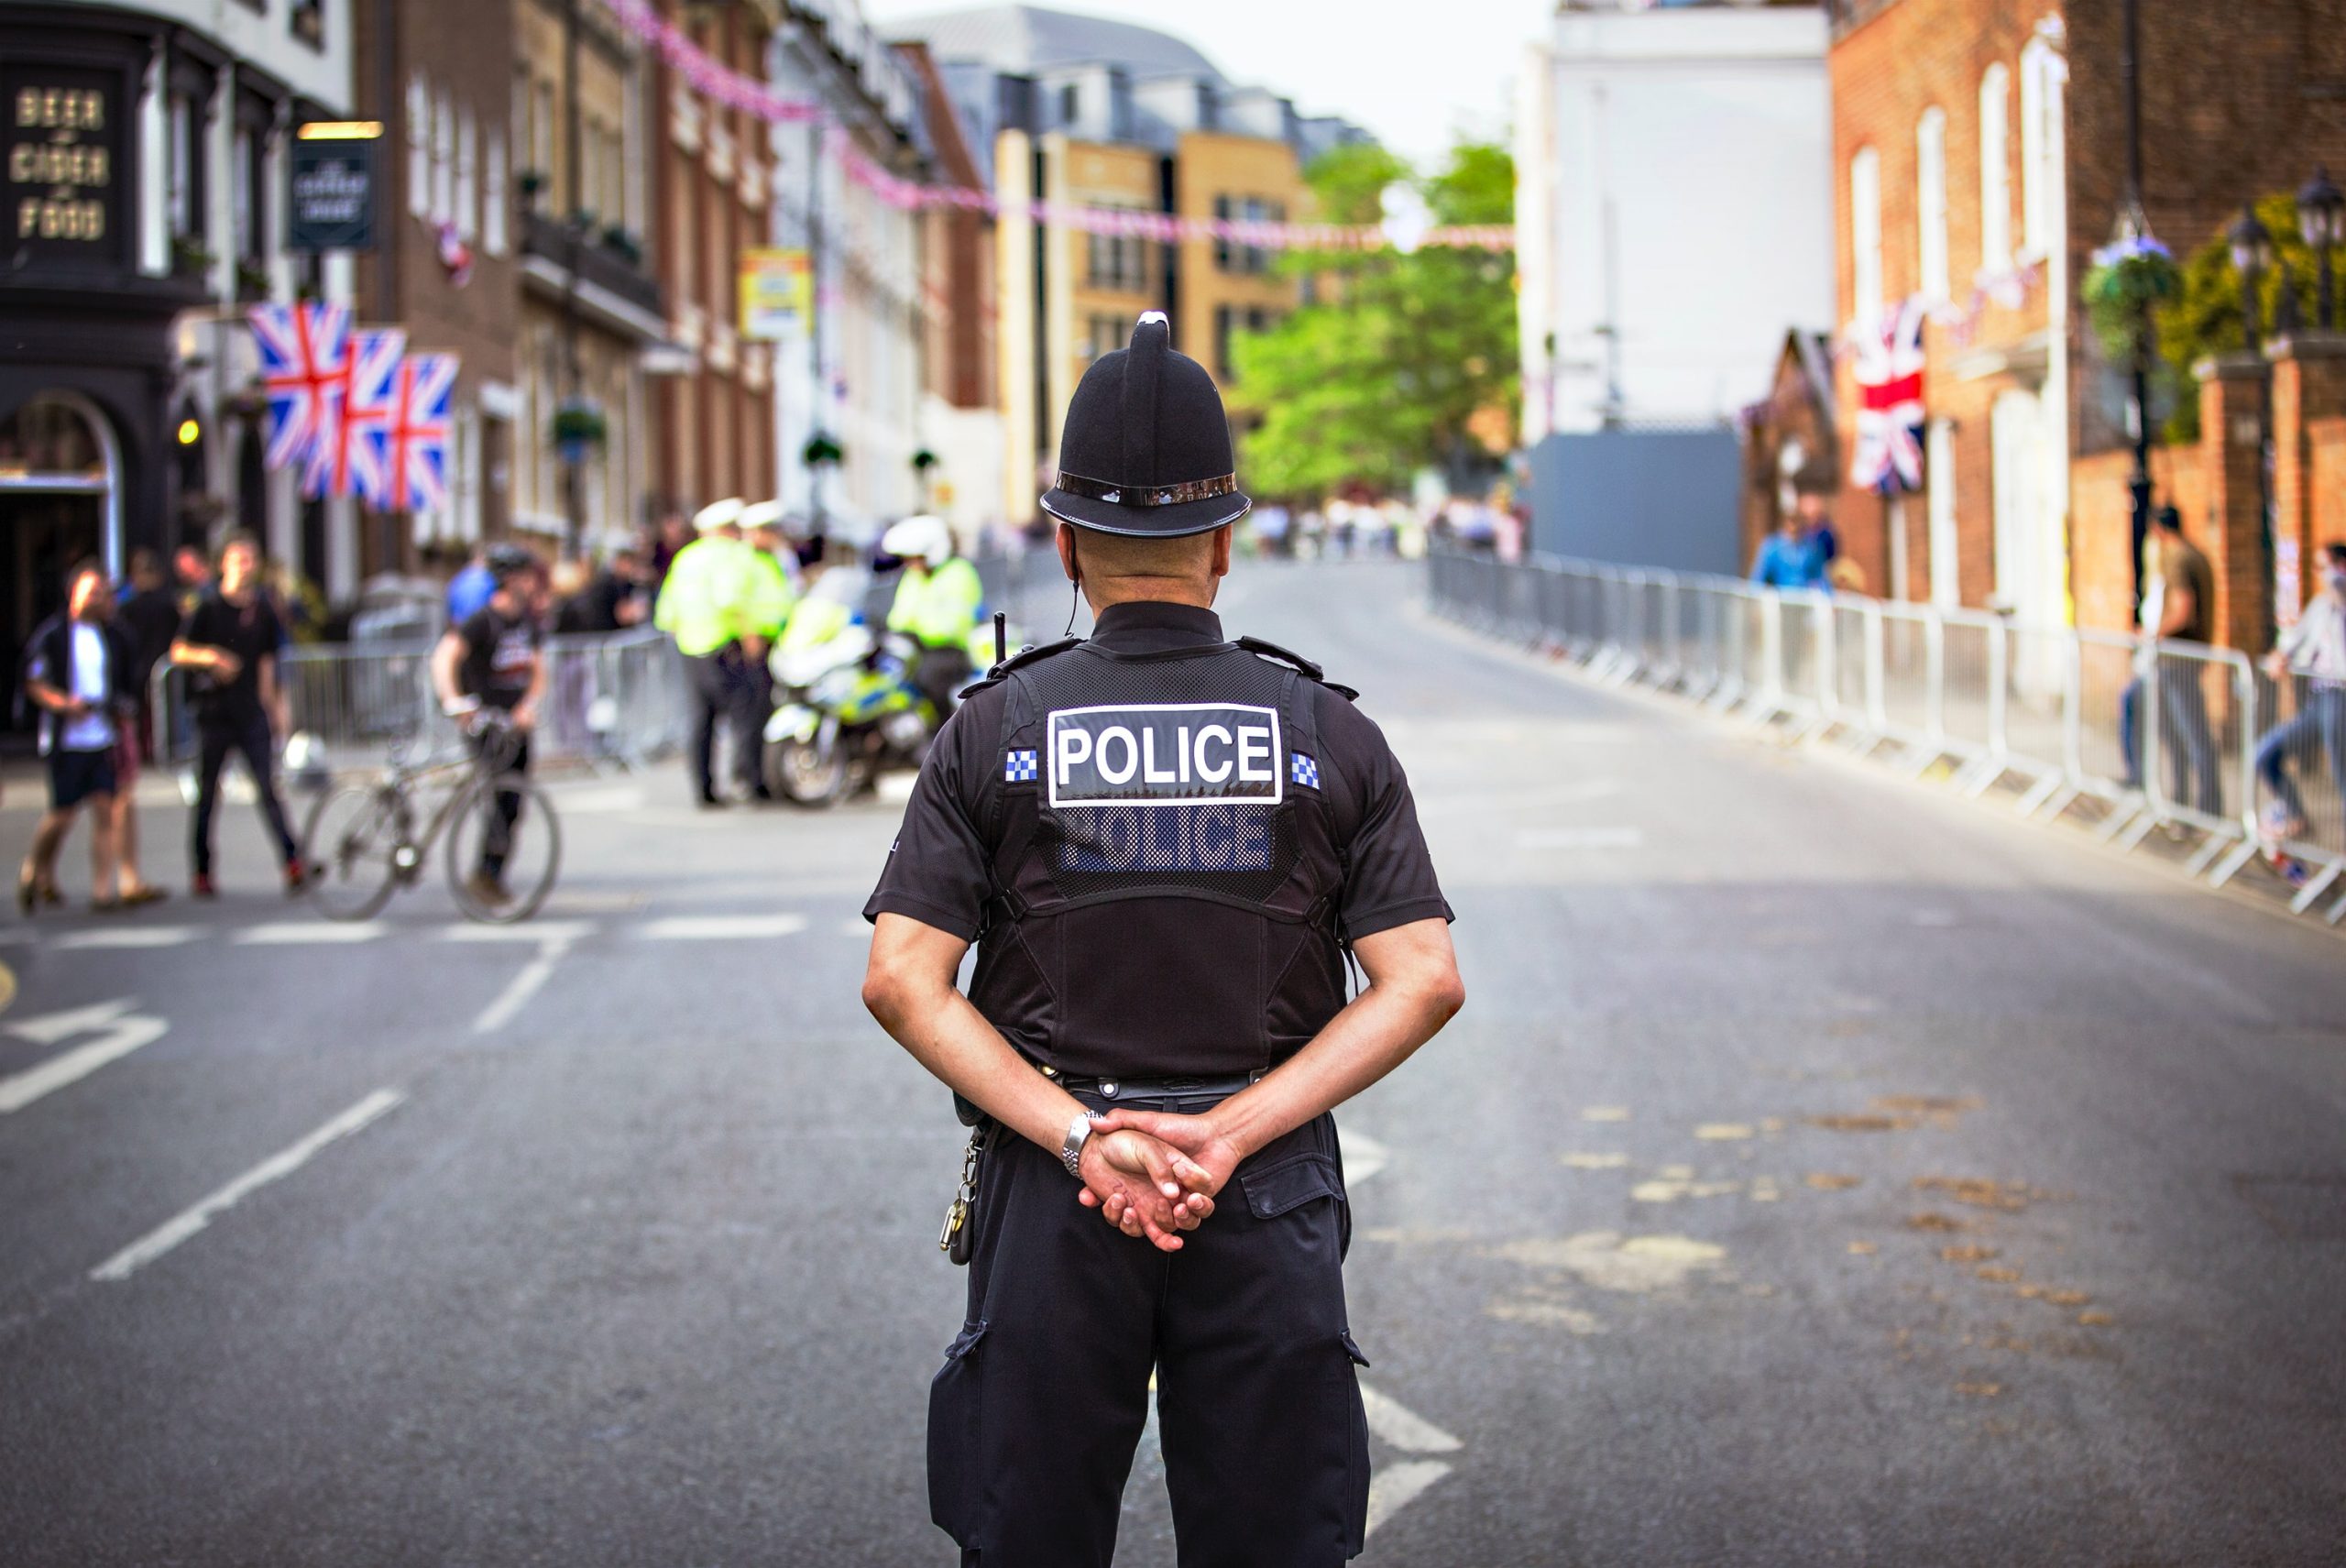 A UK police officer looks out into a road with his hands crossed behind his back